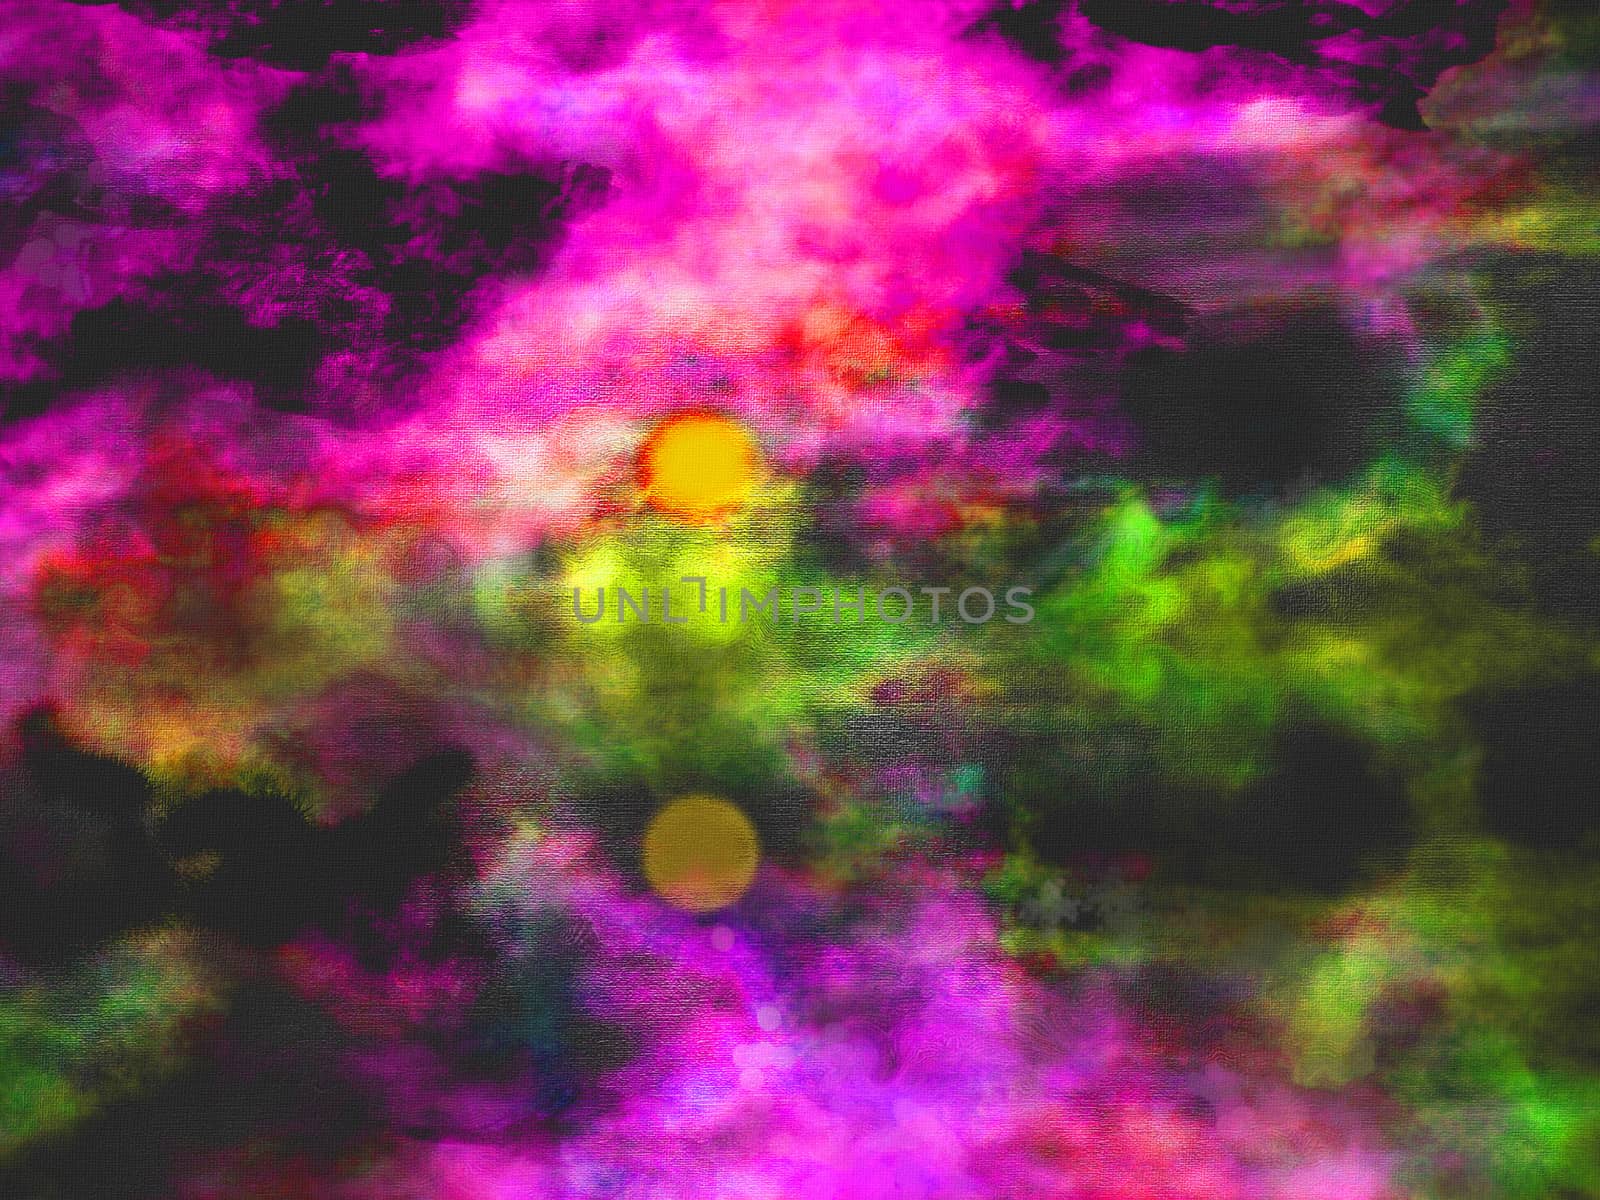 Abstract painting. Cloudy sky. Sunset or sunrise reflected on water surface